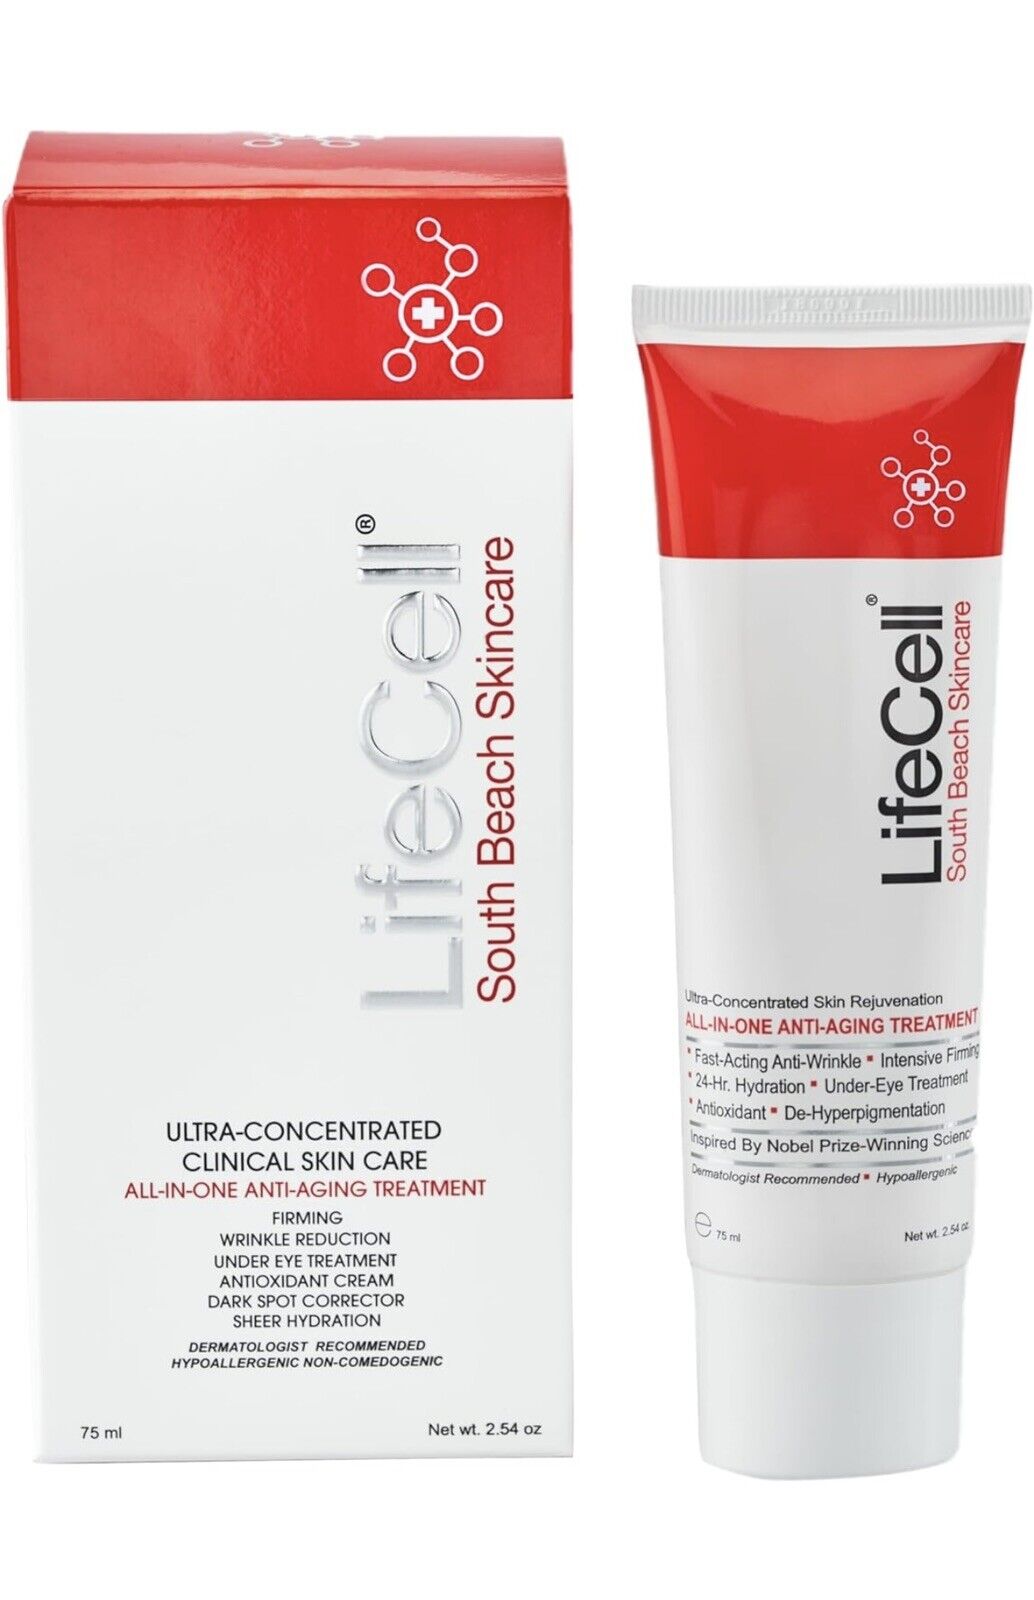 LifeCell South Beach Skincare All In One Anti-Aging Treatment - 2.54 oz